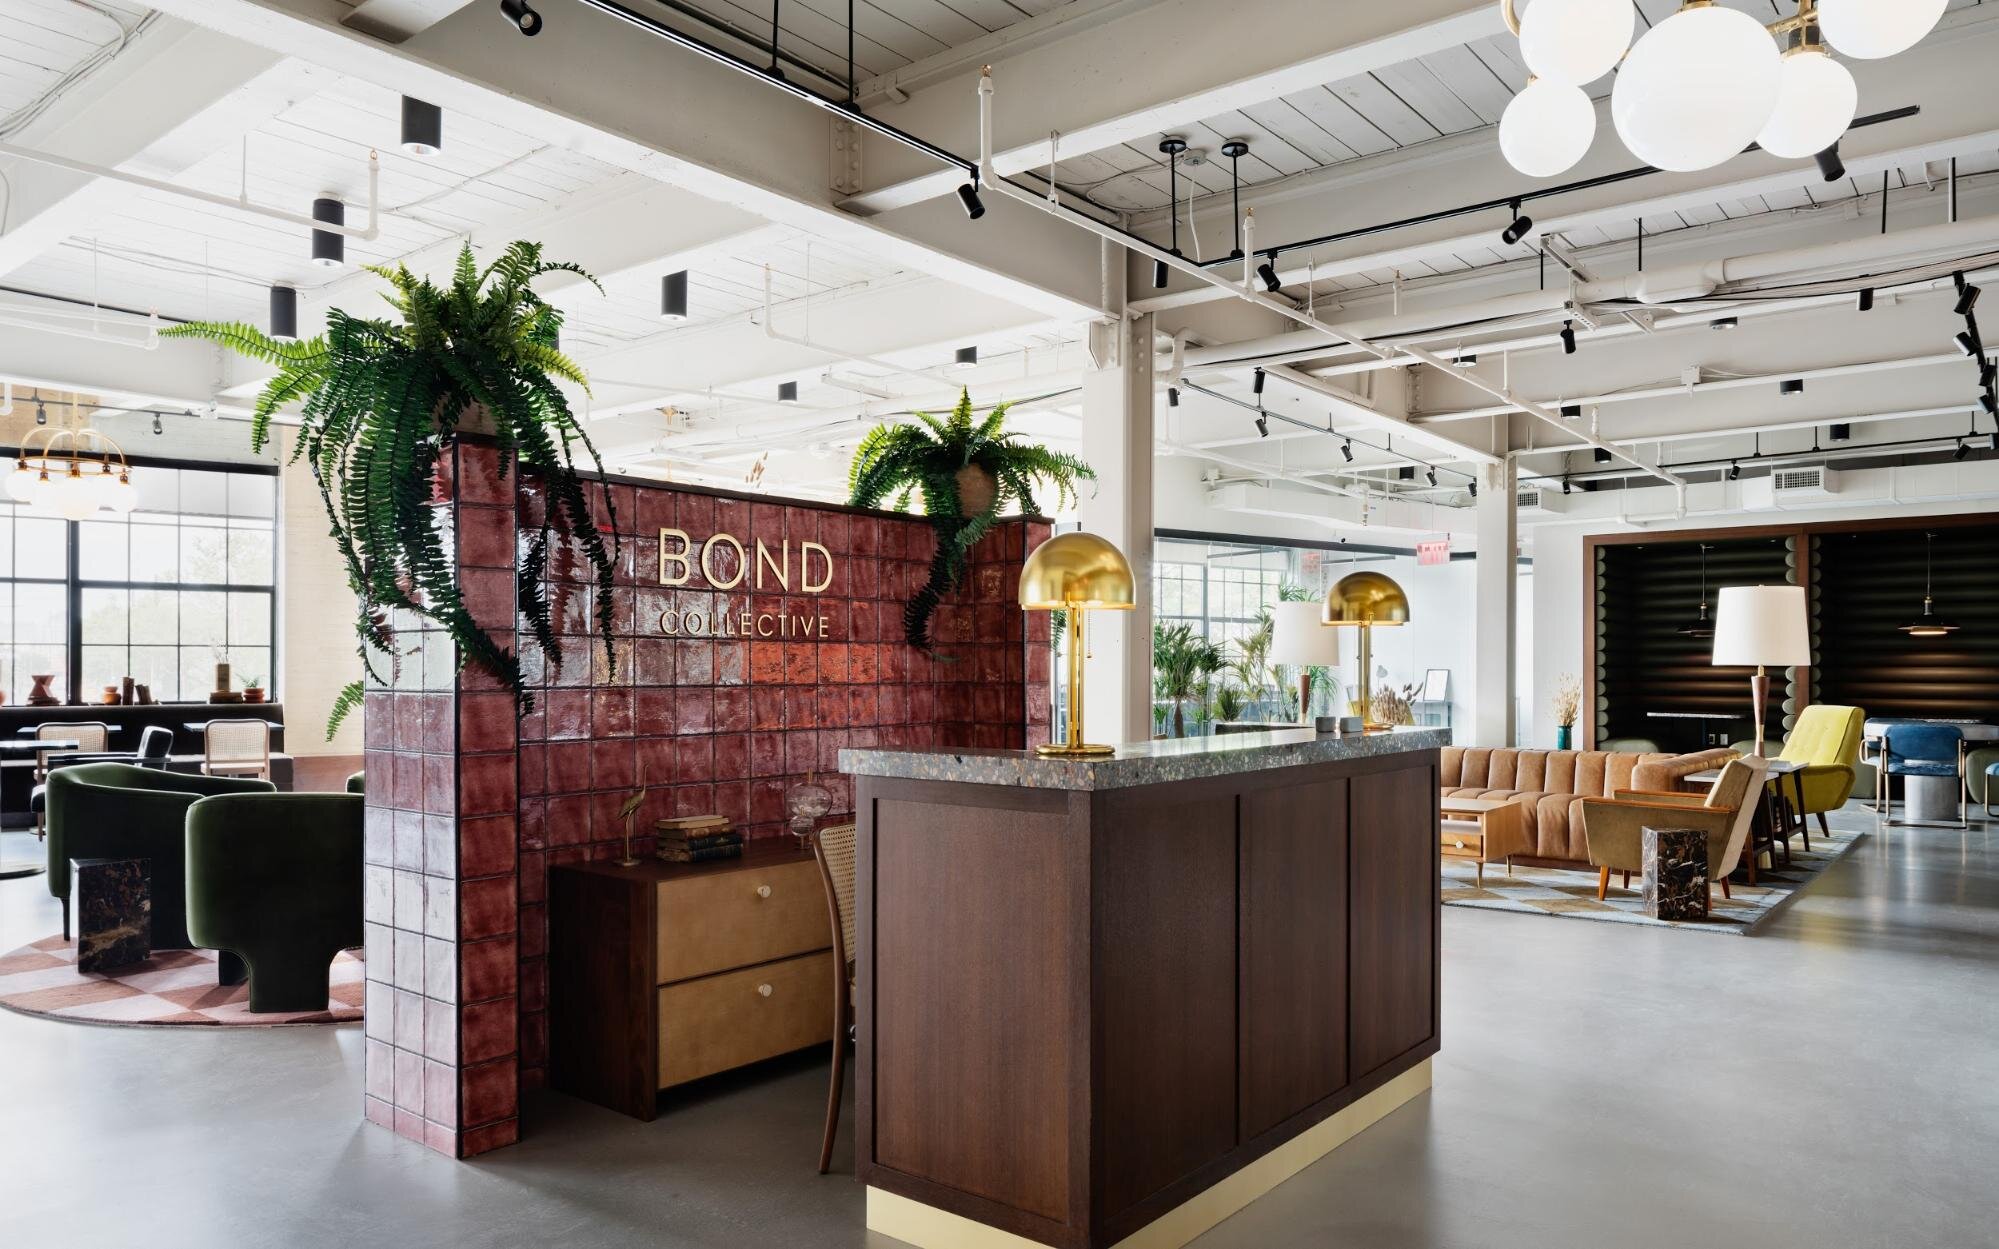 Bond collective flexible office space with lots of natural light